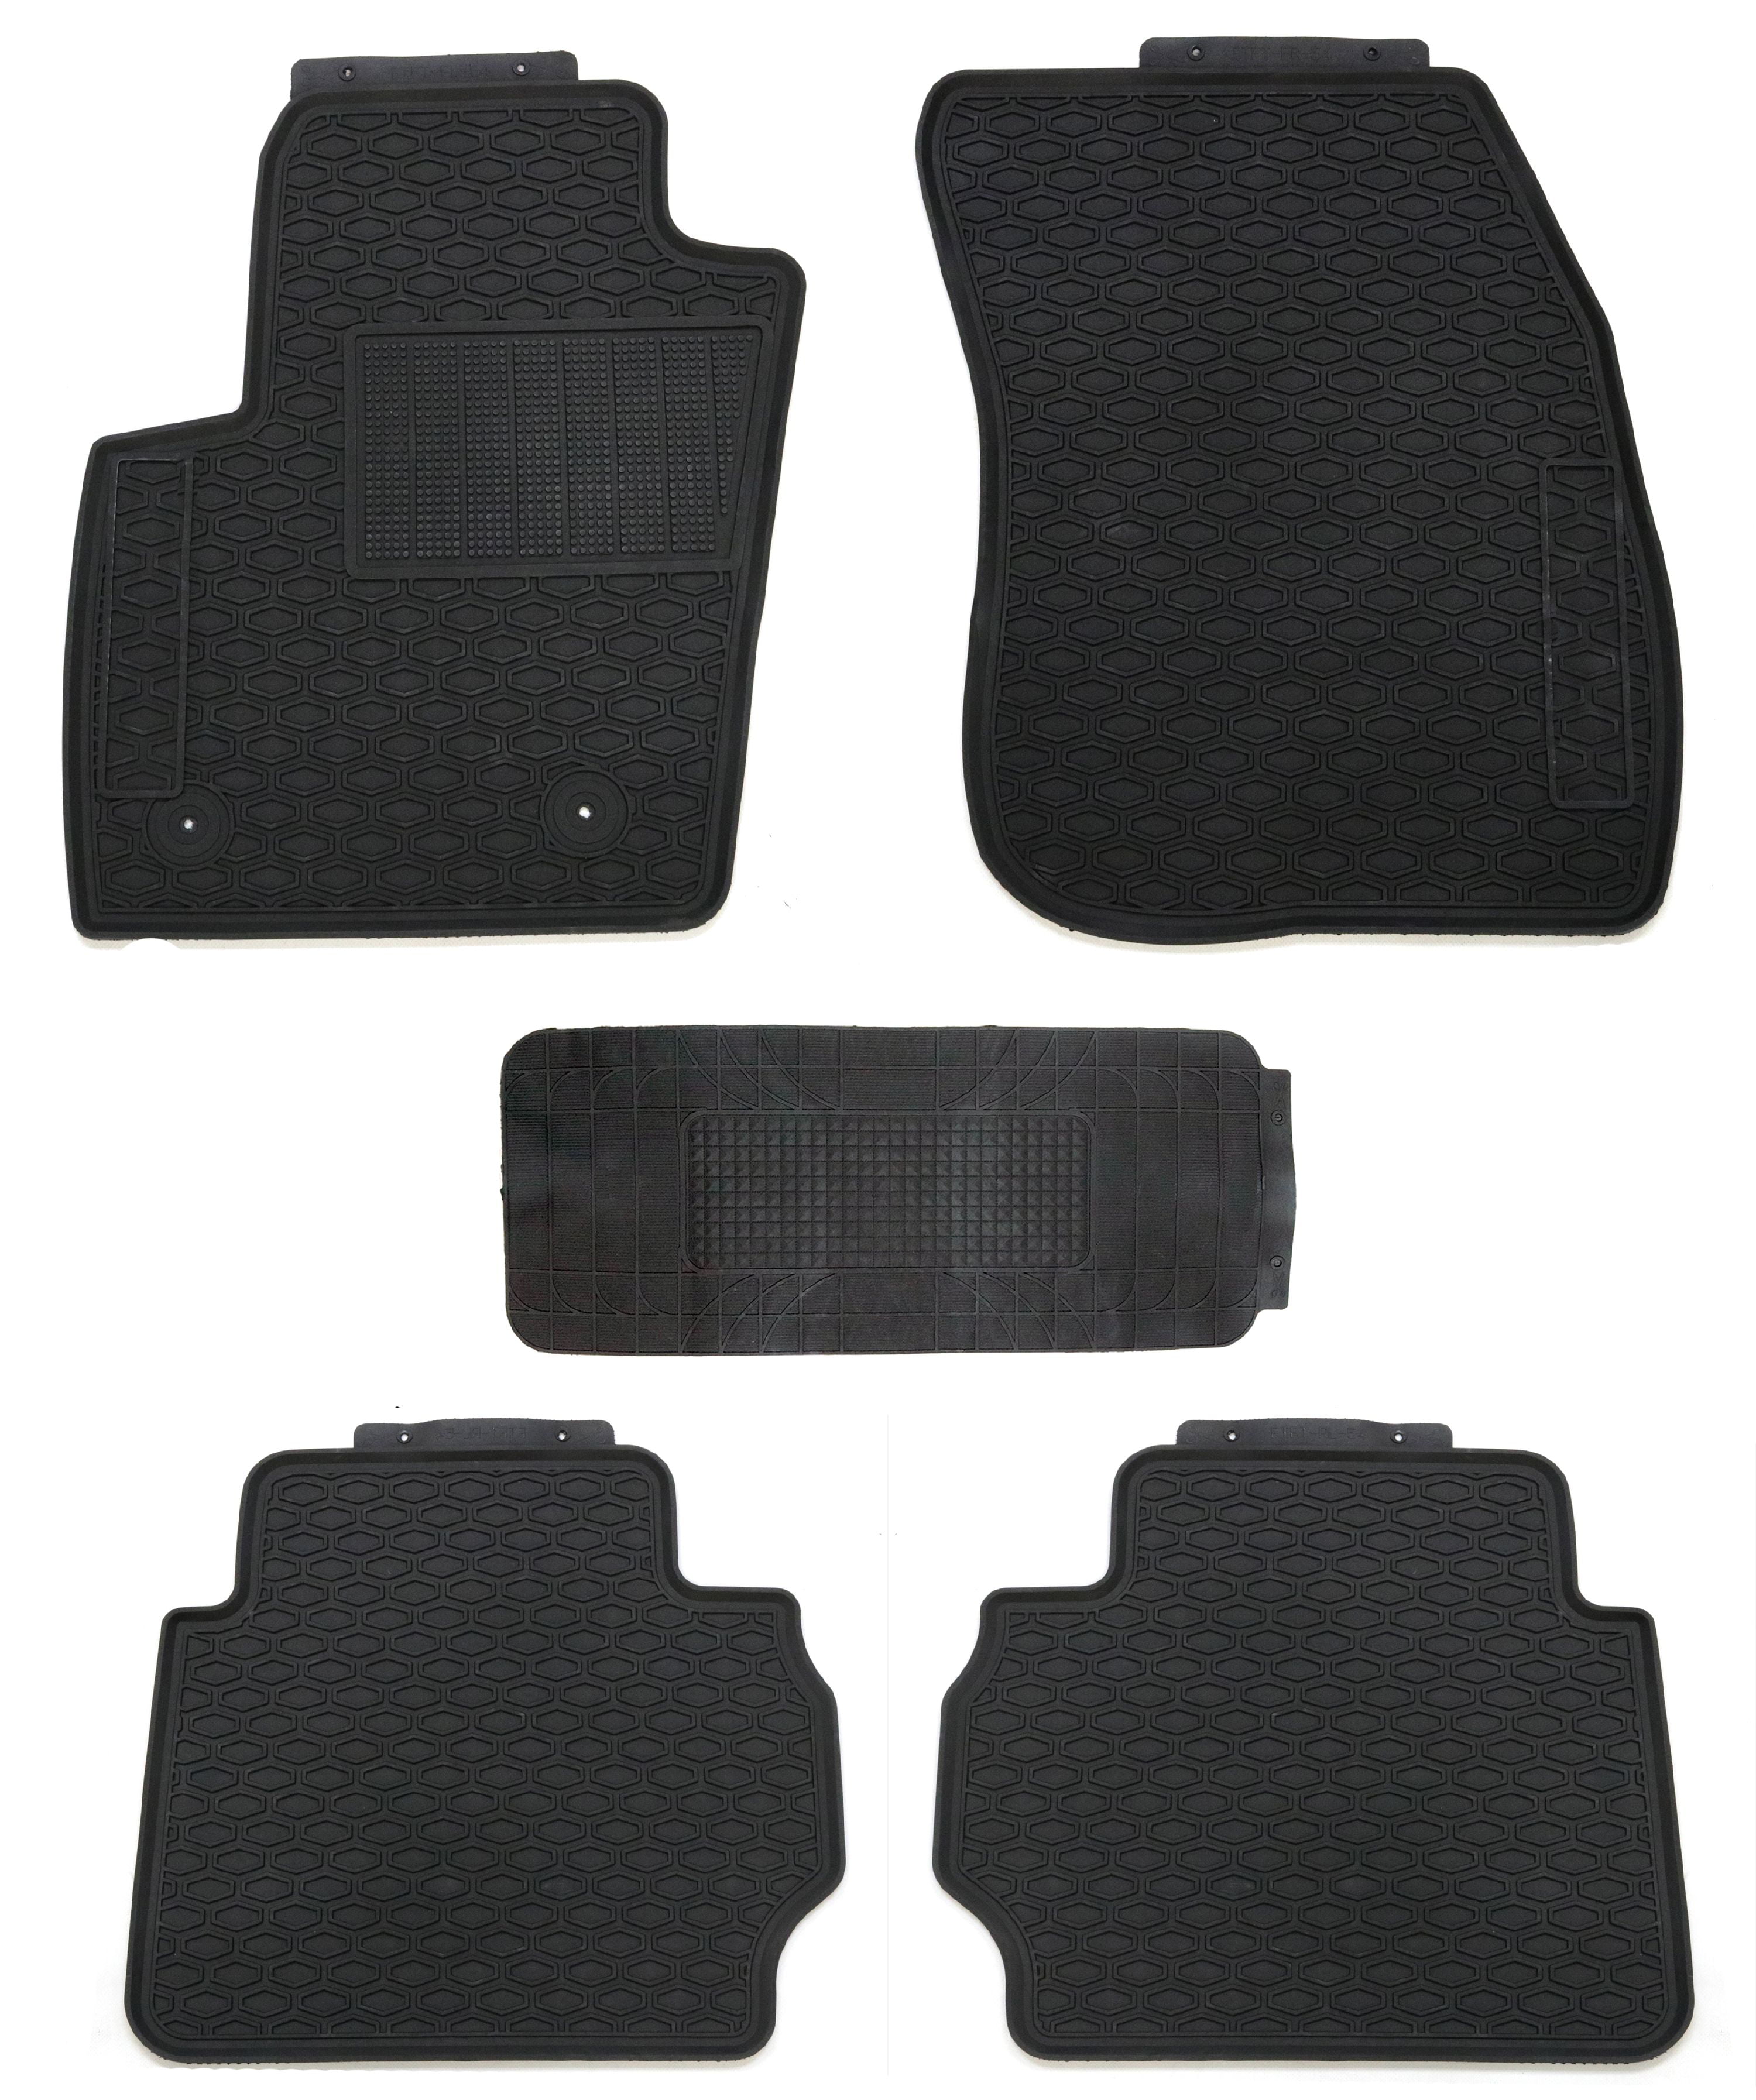 Custom Car Floor Mats for Ford Fusion 2013-2016 All Weather Waterproof Non-Slip Full Covered Protection Advanced Performance Liners Car Liner Black 